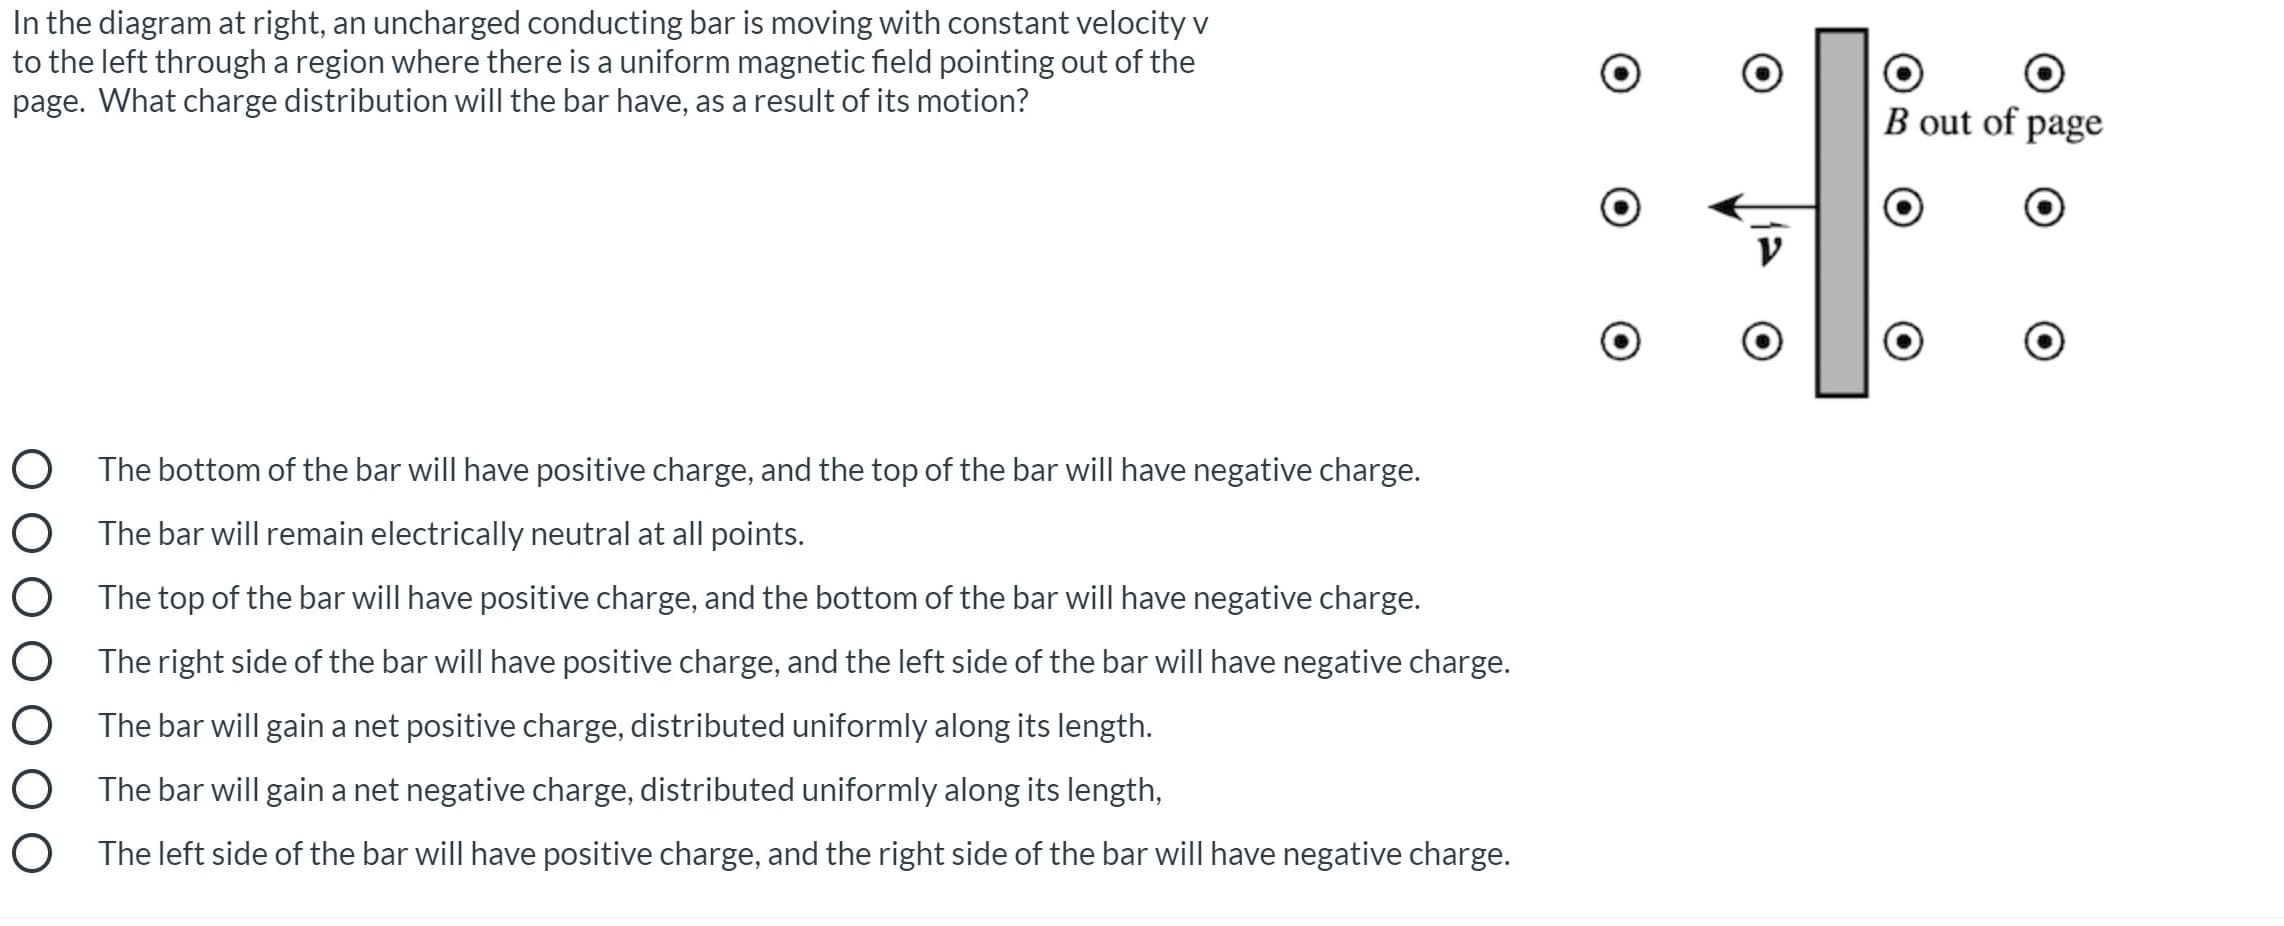 In the diagram at right, an uncharged conducting bar is moving with constant velocity v
to the left through a region where there is a uniform magnetic field pointing out of the
page. What charge distribution will the bar have, as a result of its motion?
B out of page
The bottom of the bar will have positive charge, and the top of the bar will have negative charge.
The bar will remain electrically neutral at all points.
The top of the bar will have positive charge, and the bottom of the bar will have negative charge.
The right side of the bar will have positive charge, and the left side of the bar will have negative charge.
The bar will gain a net positive charge, distributed uniformly along its length.
The bar will gain a net negative charge, distributed uniformly along its length,
The left side of the bar will have positive charge, and the right side of the bar will have negative charge.
